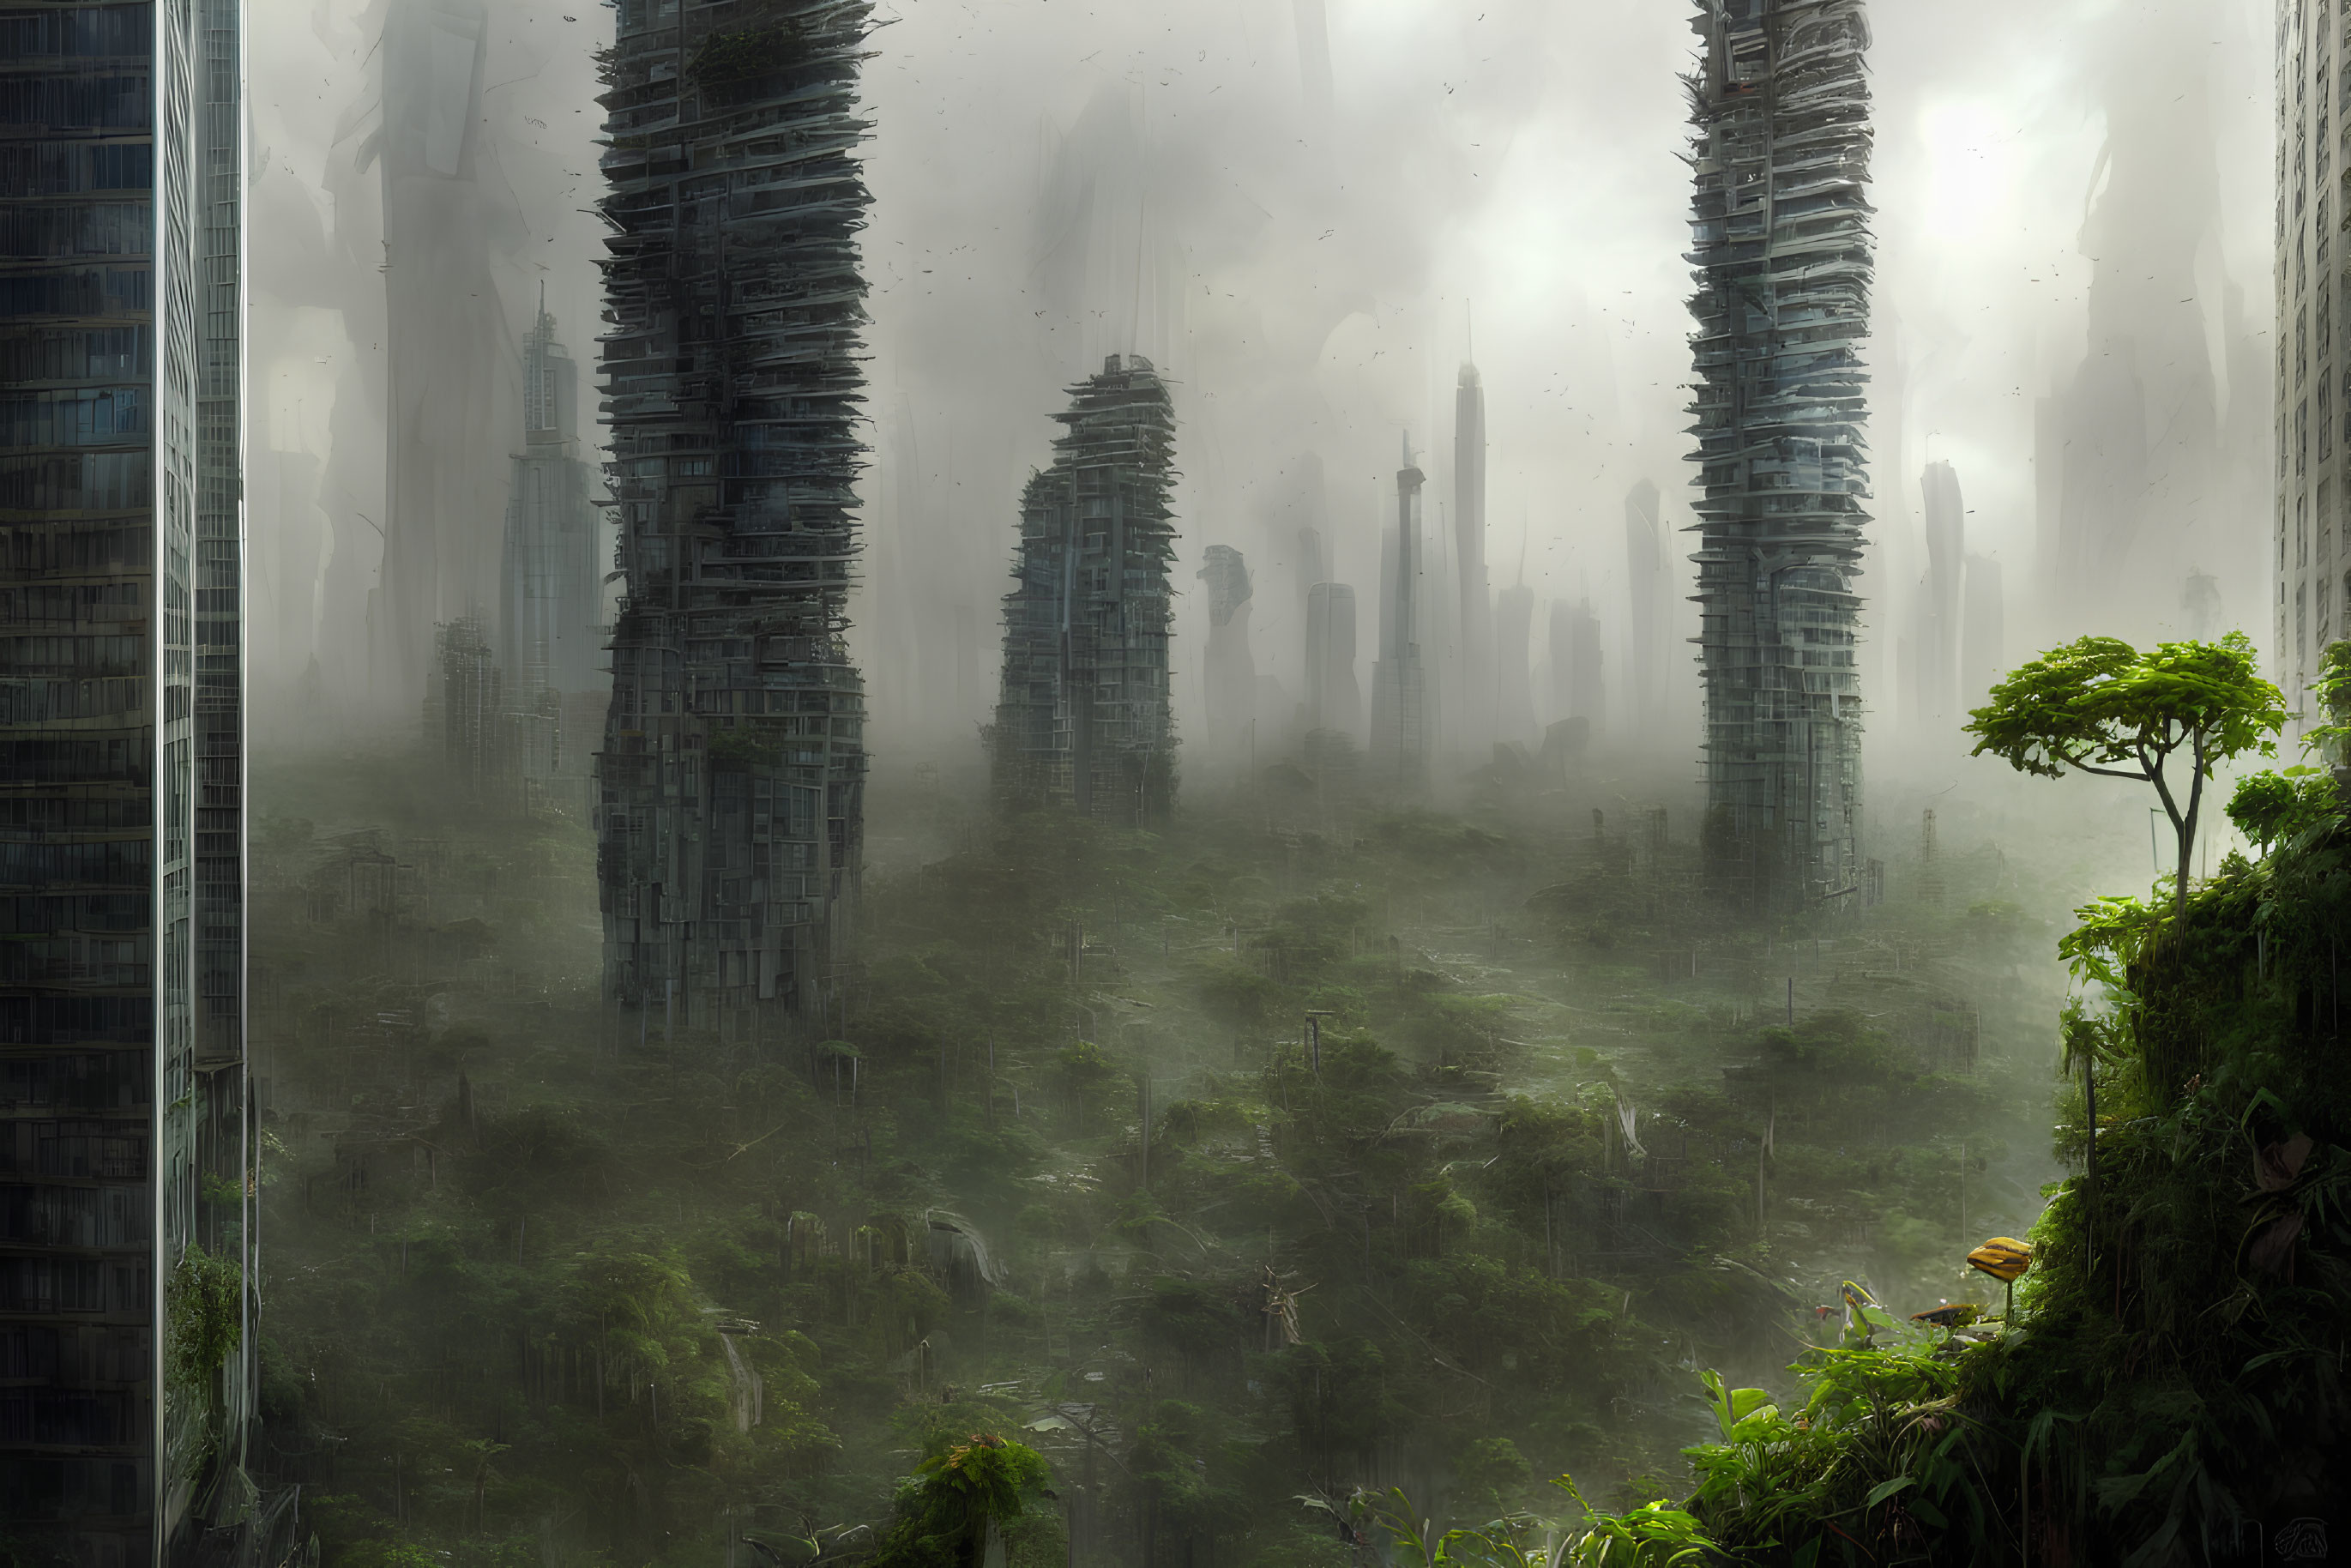 Futuristic cityscape with overgrown skyscrapers and misty atmosphere